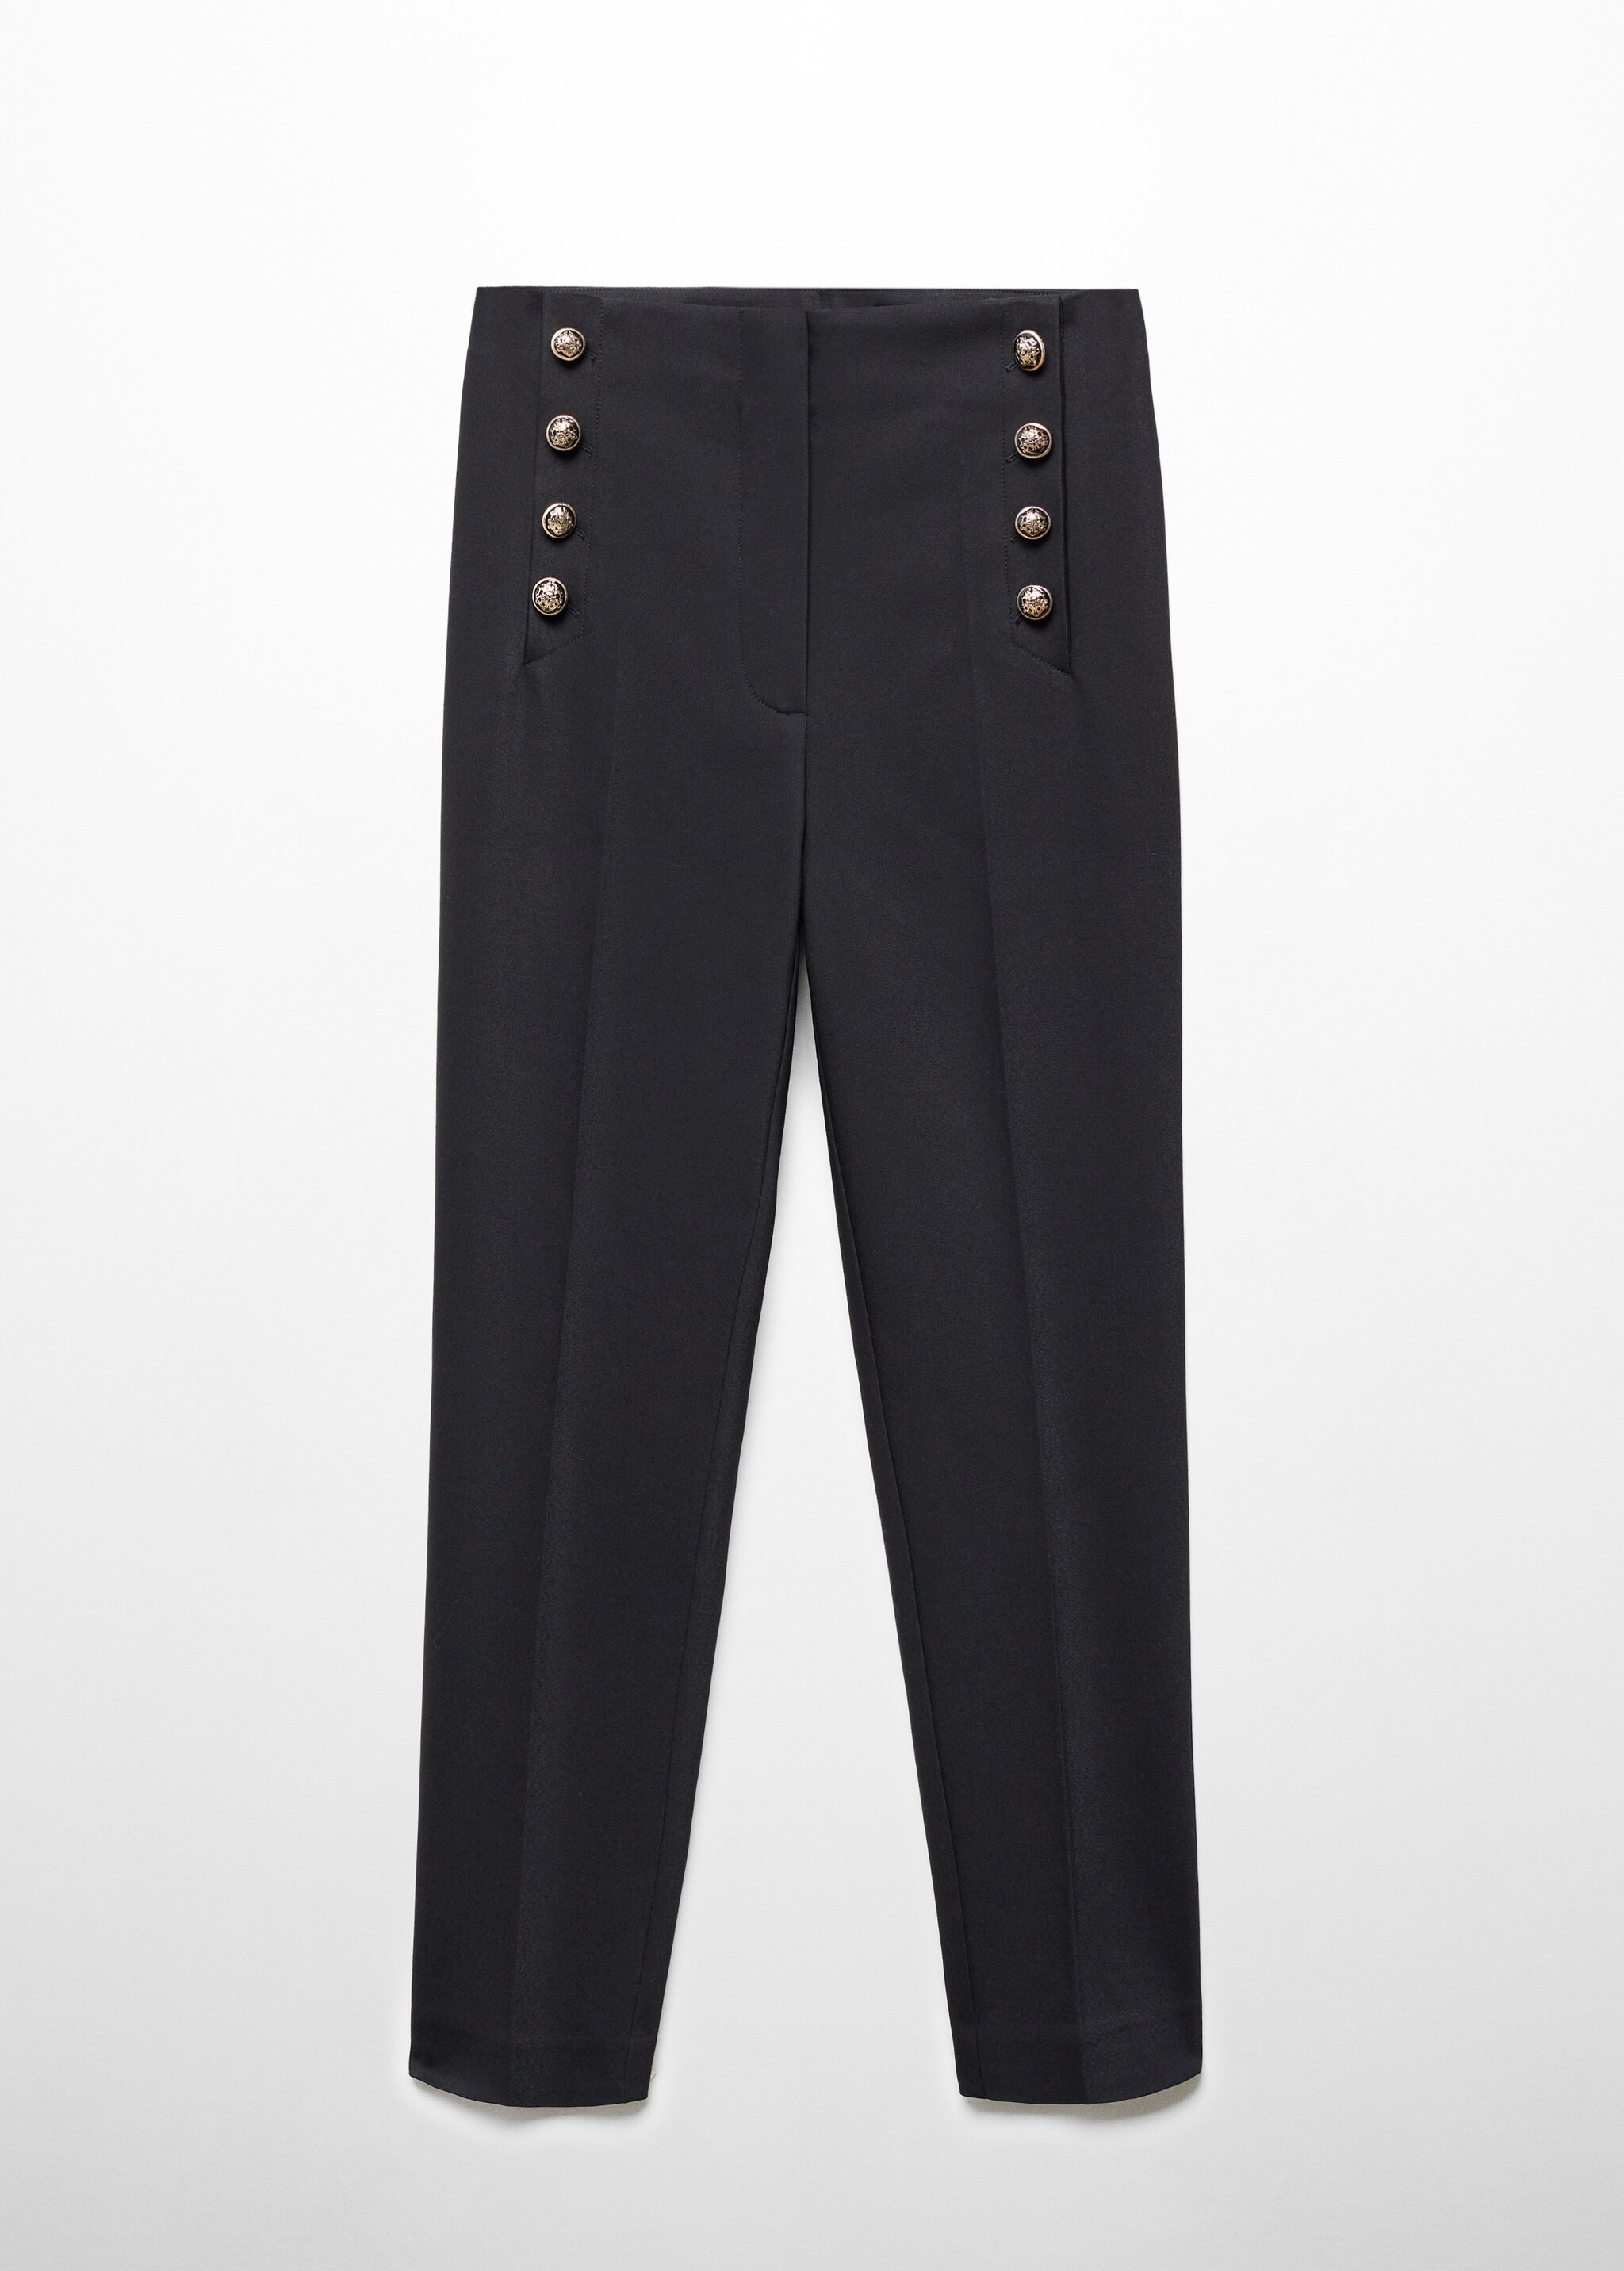 Cropped button trousers - Article without model